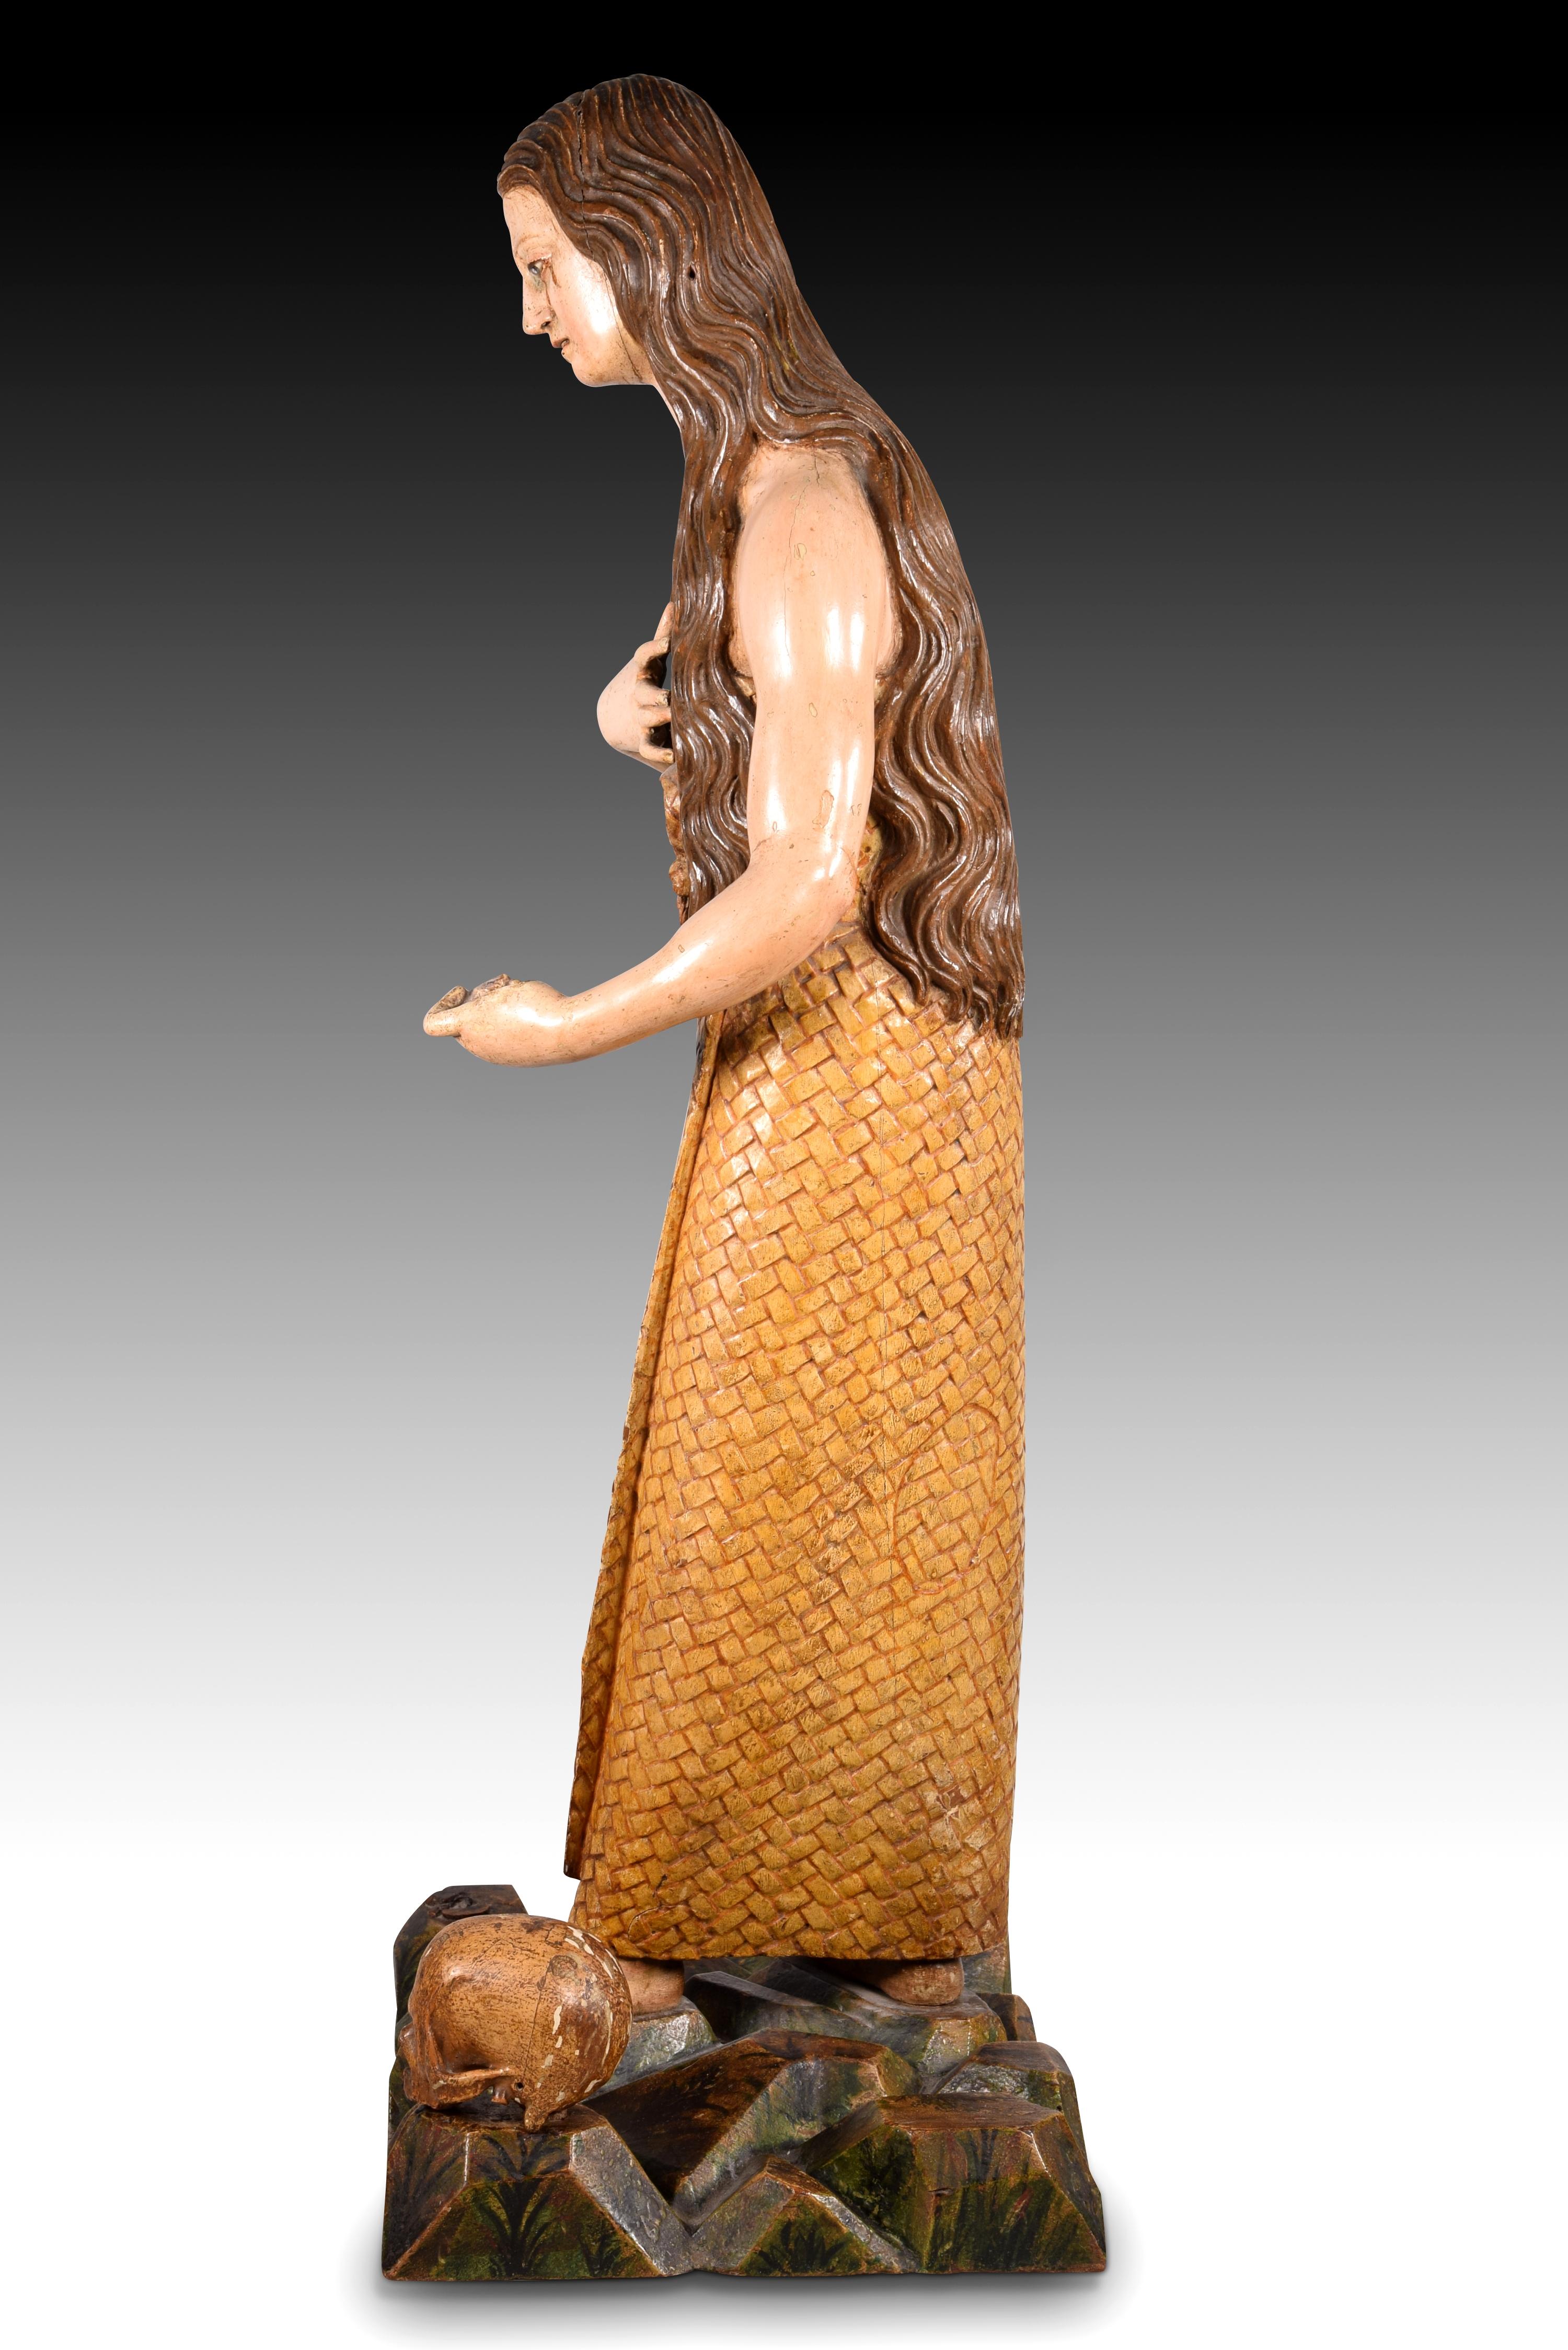 17th Century Mary Magdalene, Polychromed Wood, Spain, Ca Late 17th C, after Pedro de Mena